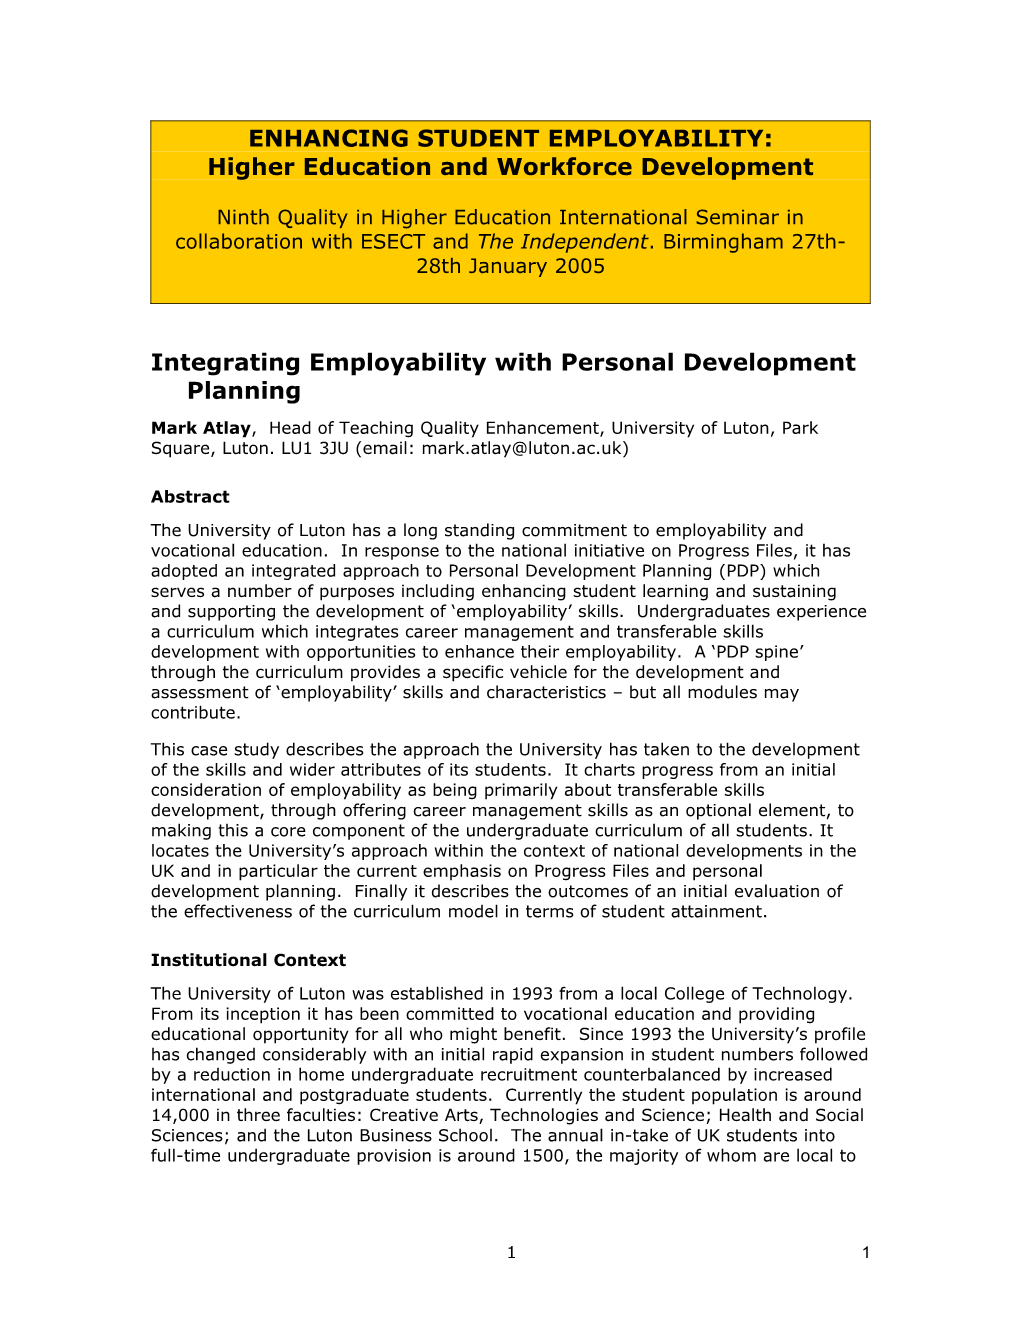 Refreshing and Revising an Institutional Approach to Skills Development